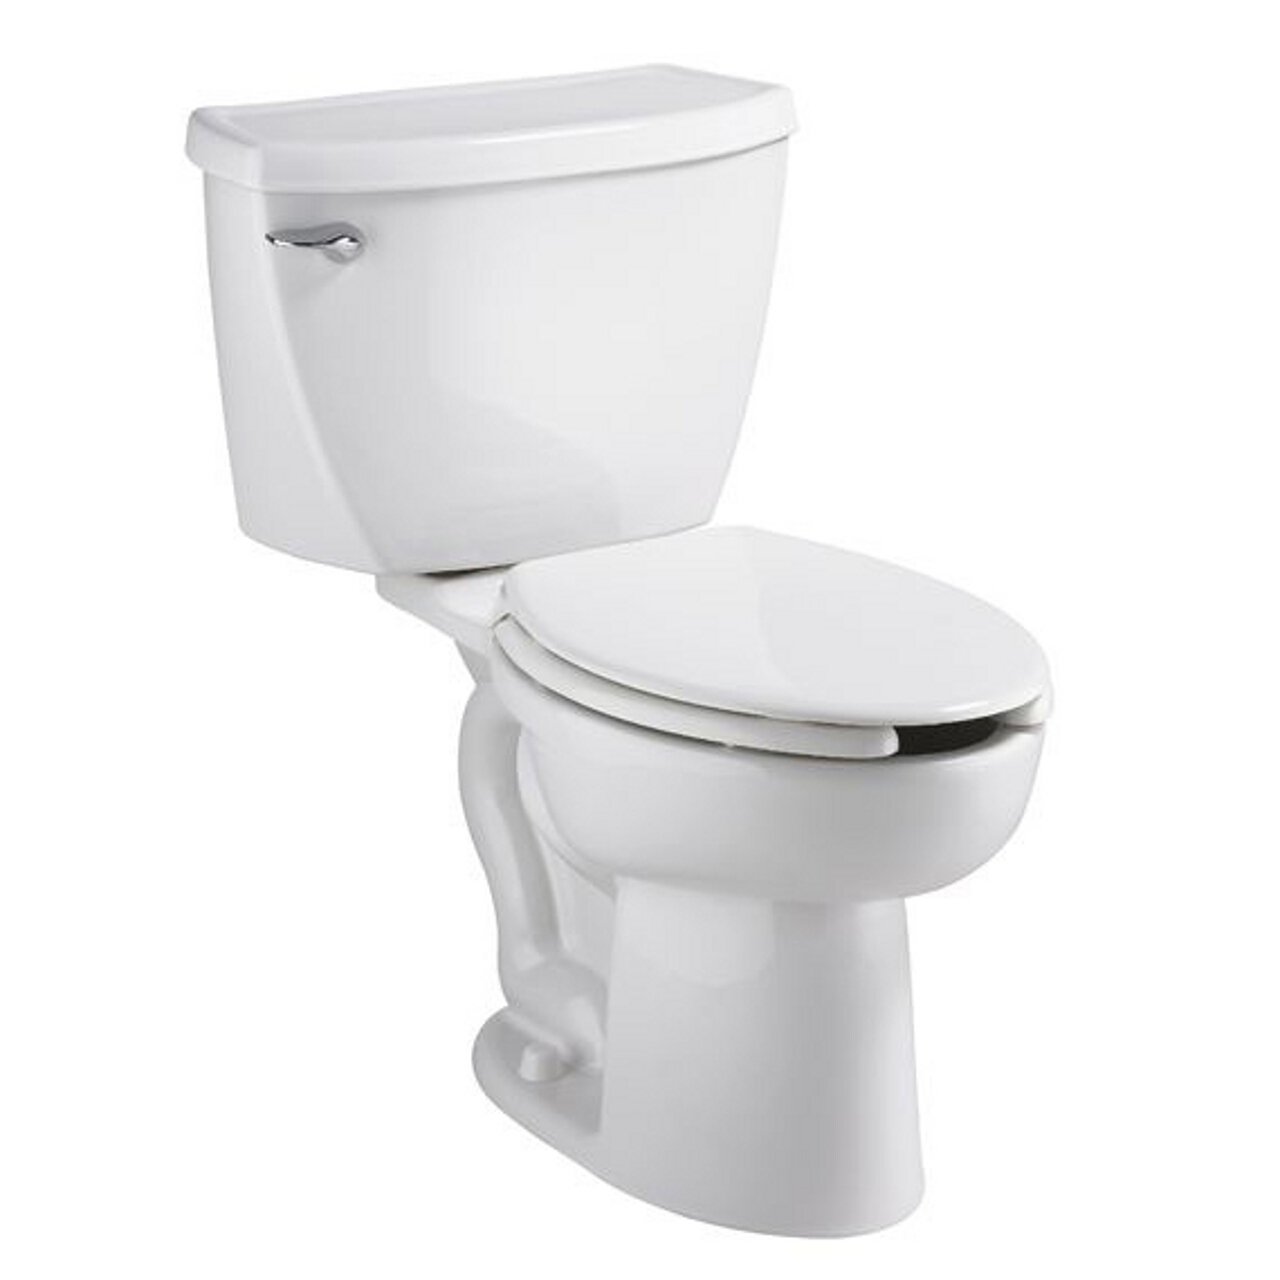 American Standard 2467.100.020 Cadet Flowise Pressure Assisted Elongated Right-Height Two-Piece Toilet with EverClean, White